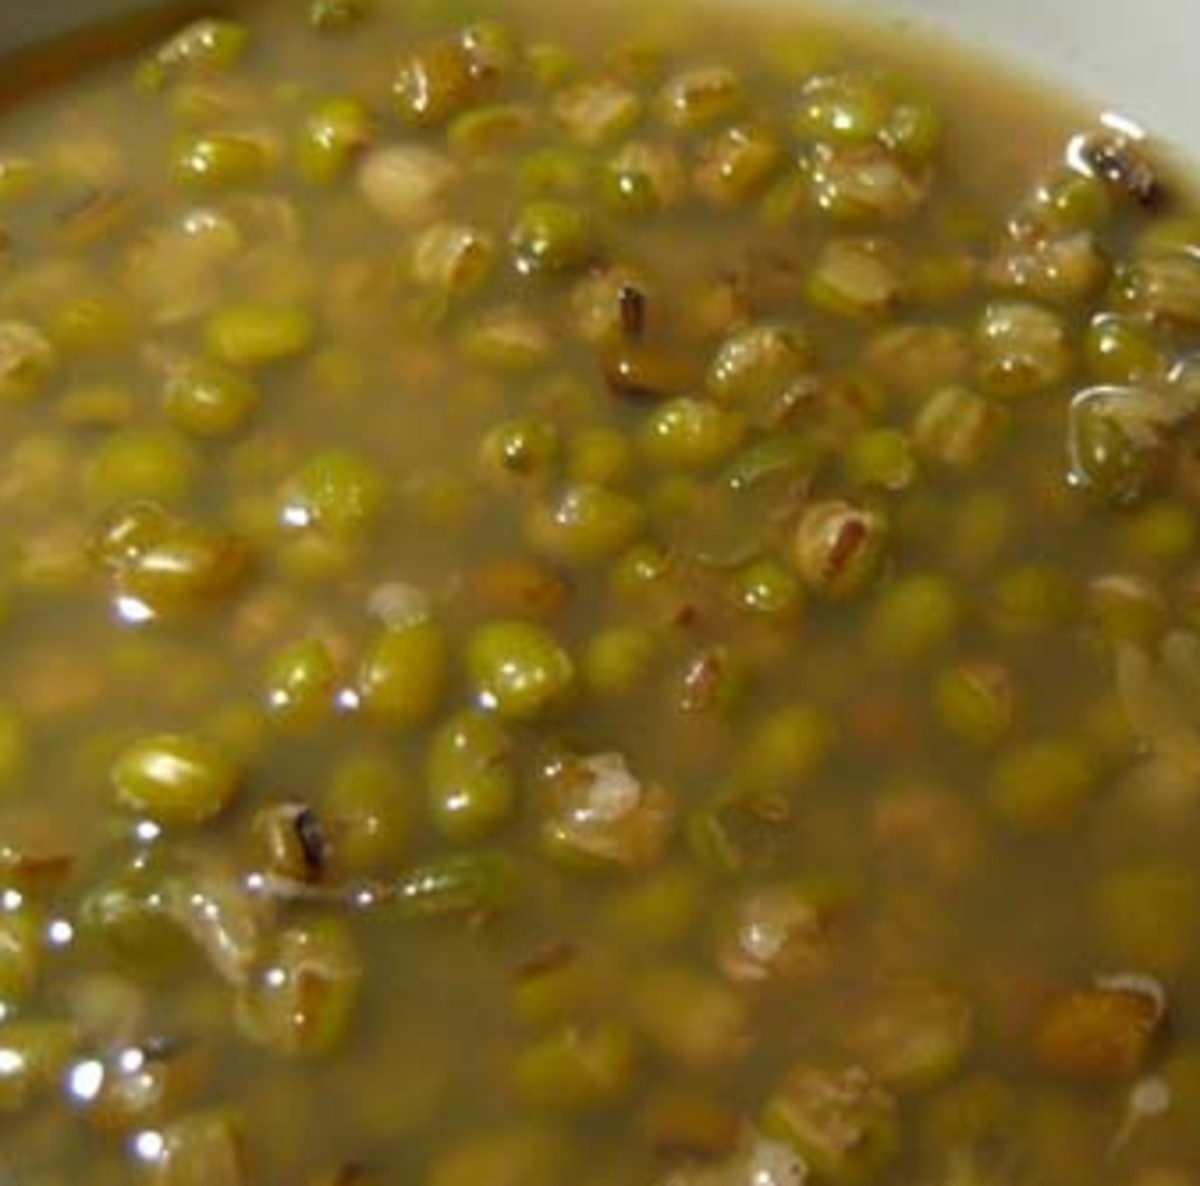 Chinese Mung Bean (Green Bean) Soup Recipe - Superfood with Medicinal Values